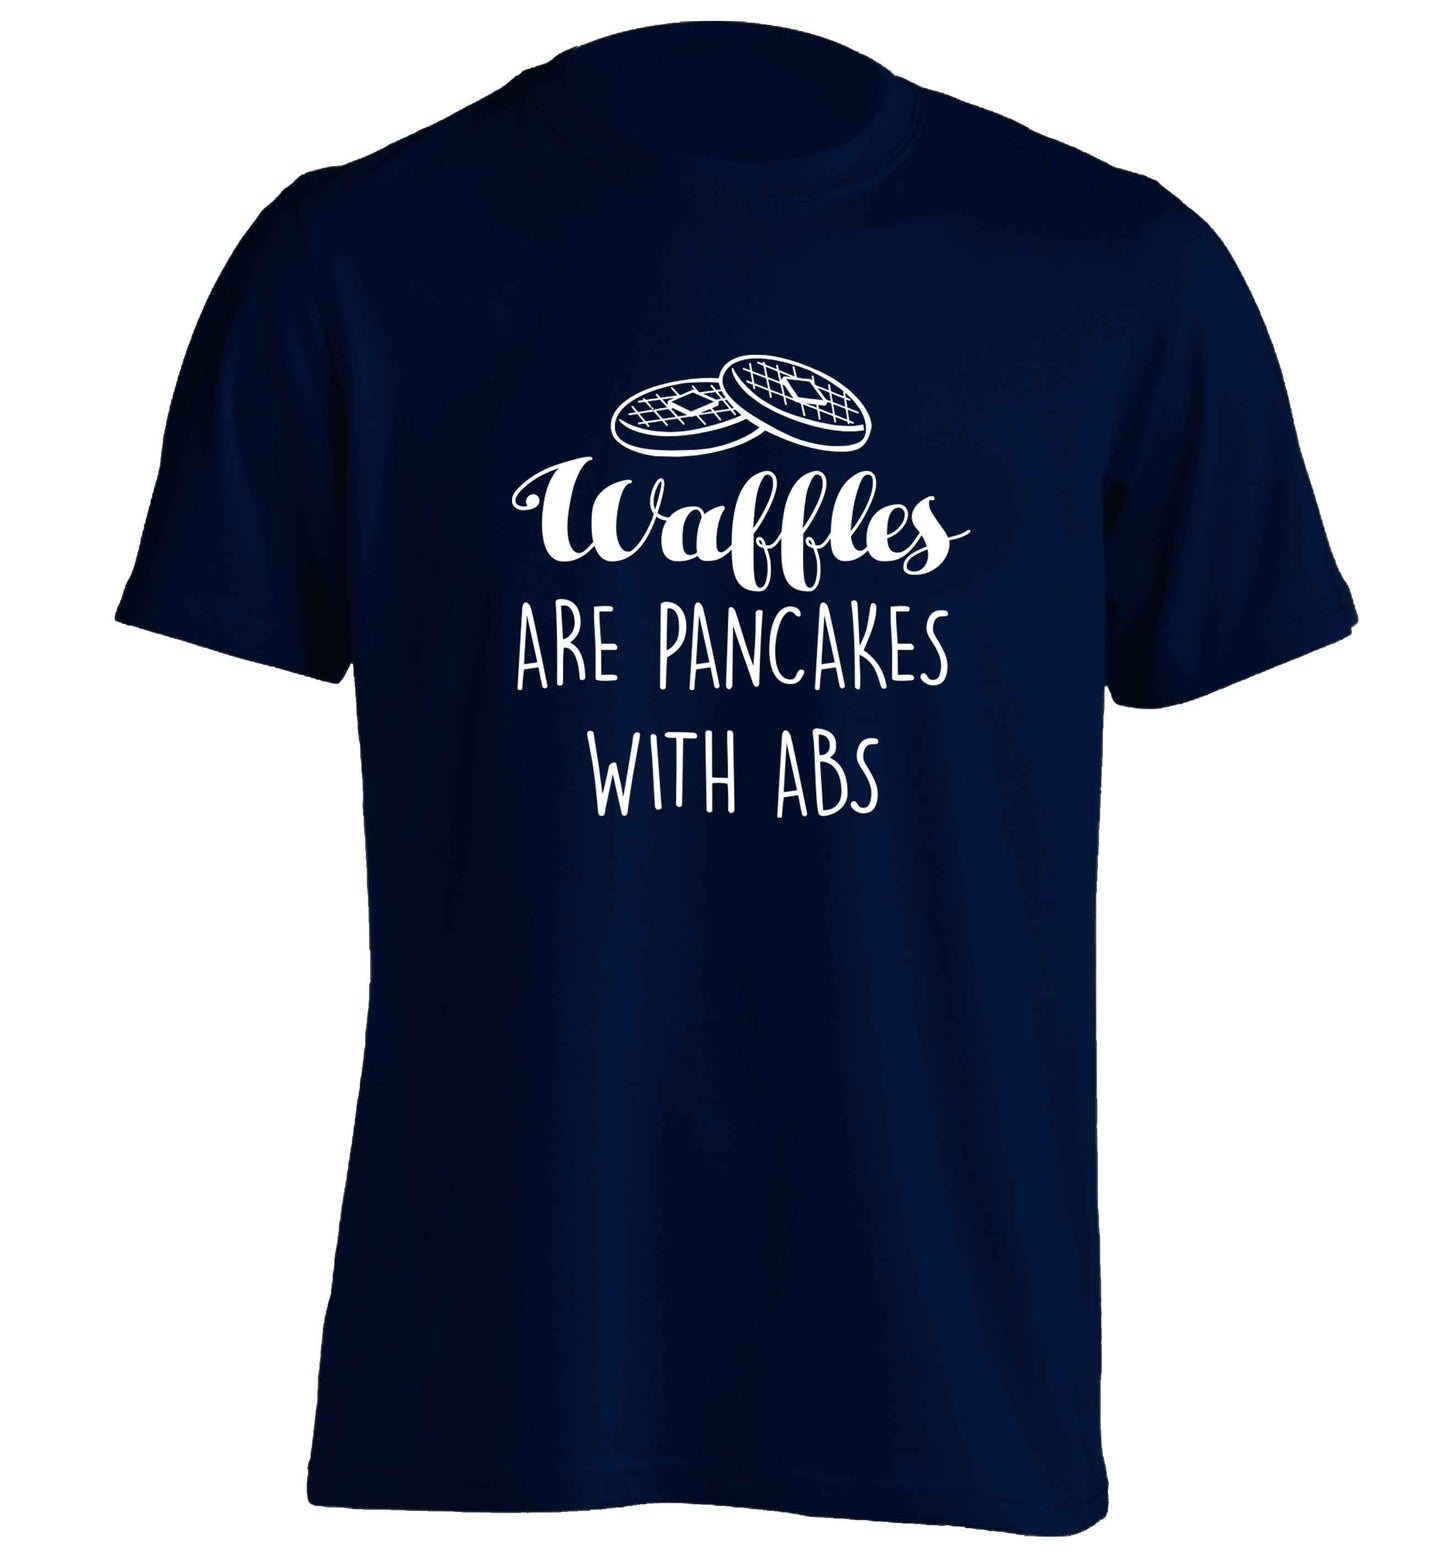 Waffles are just pancakes with abs adults unisex navy Tshirt 2XL